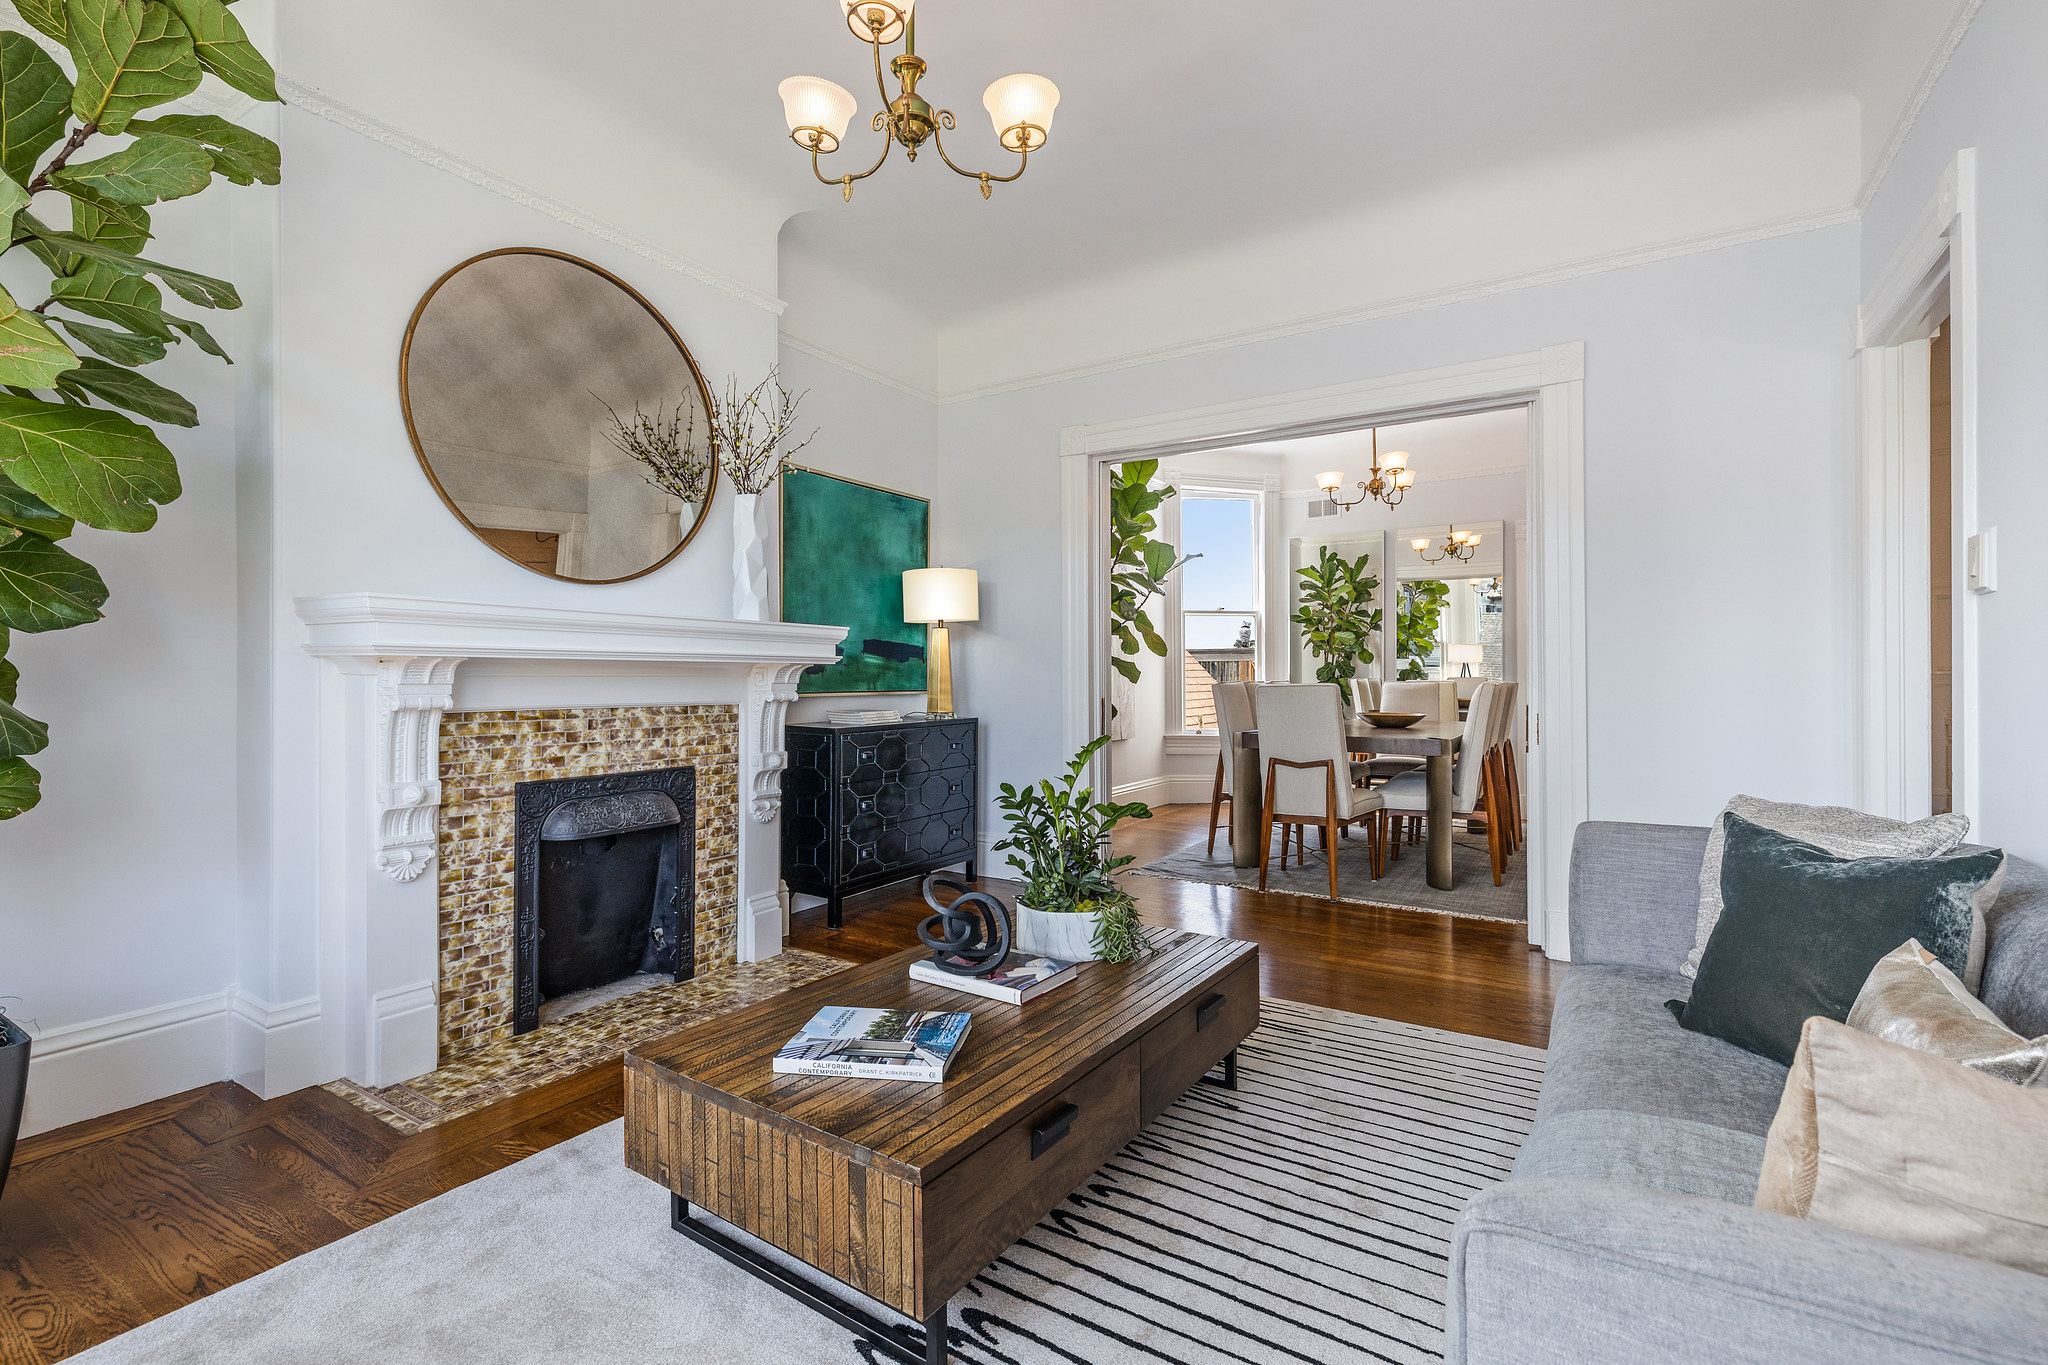 Property Photo: Living room at 454 Frederick Street, showing a fireplace and view into the dining area